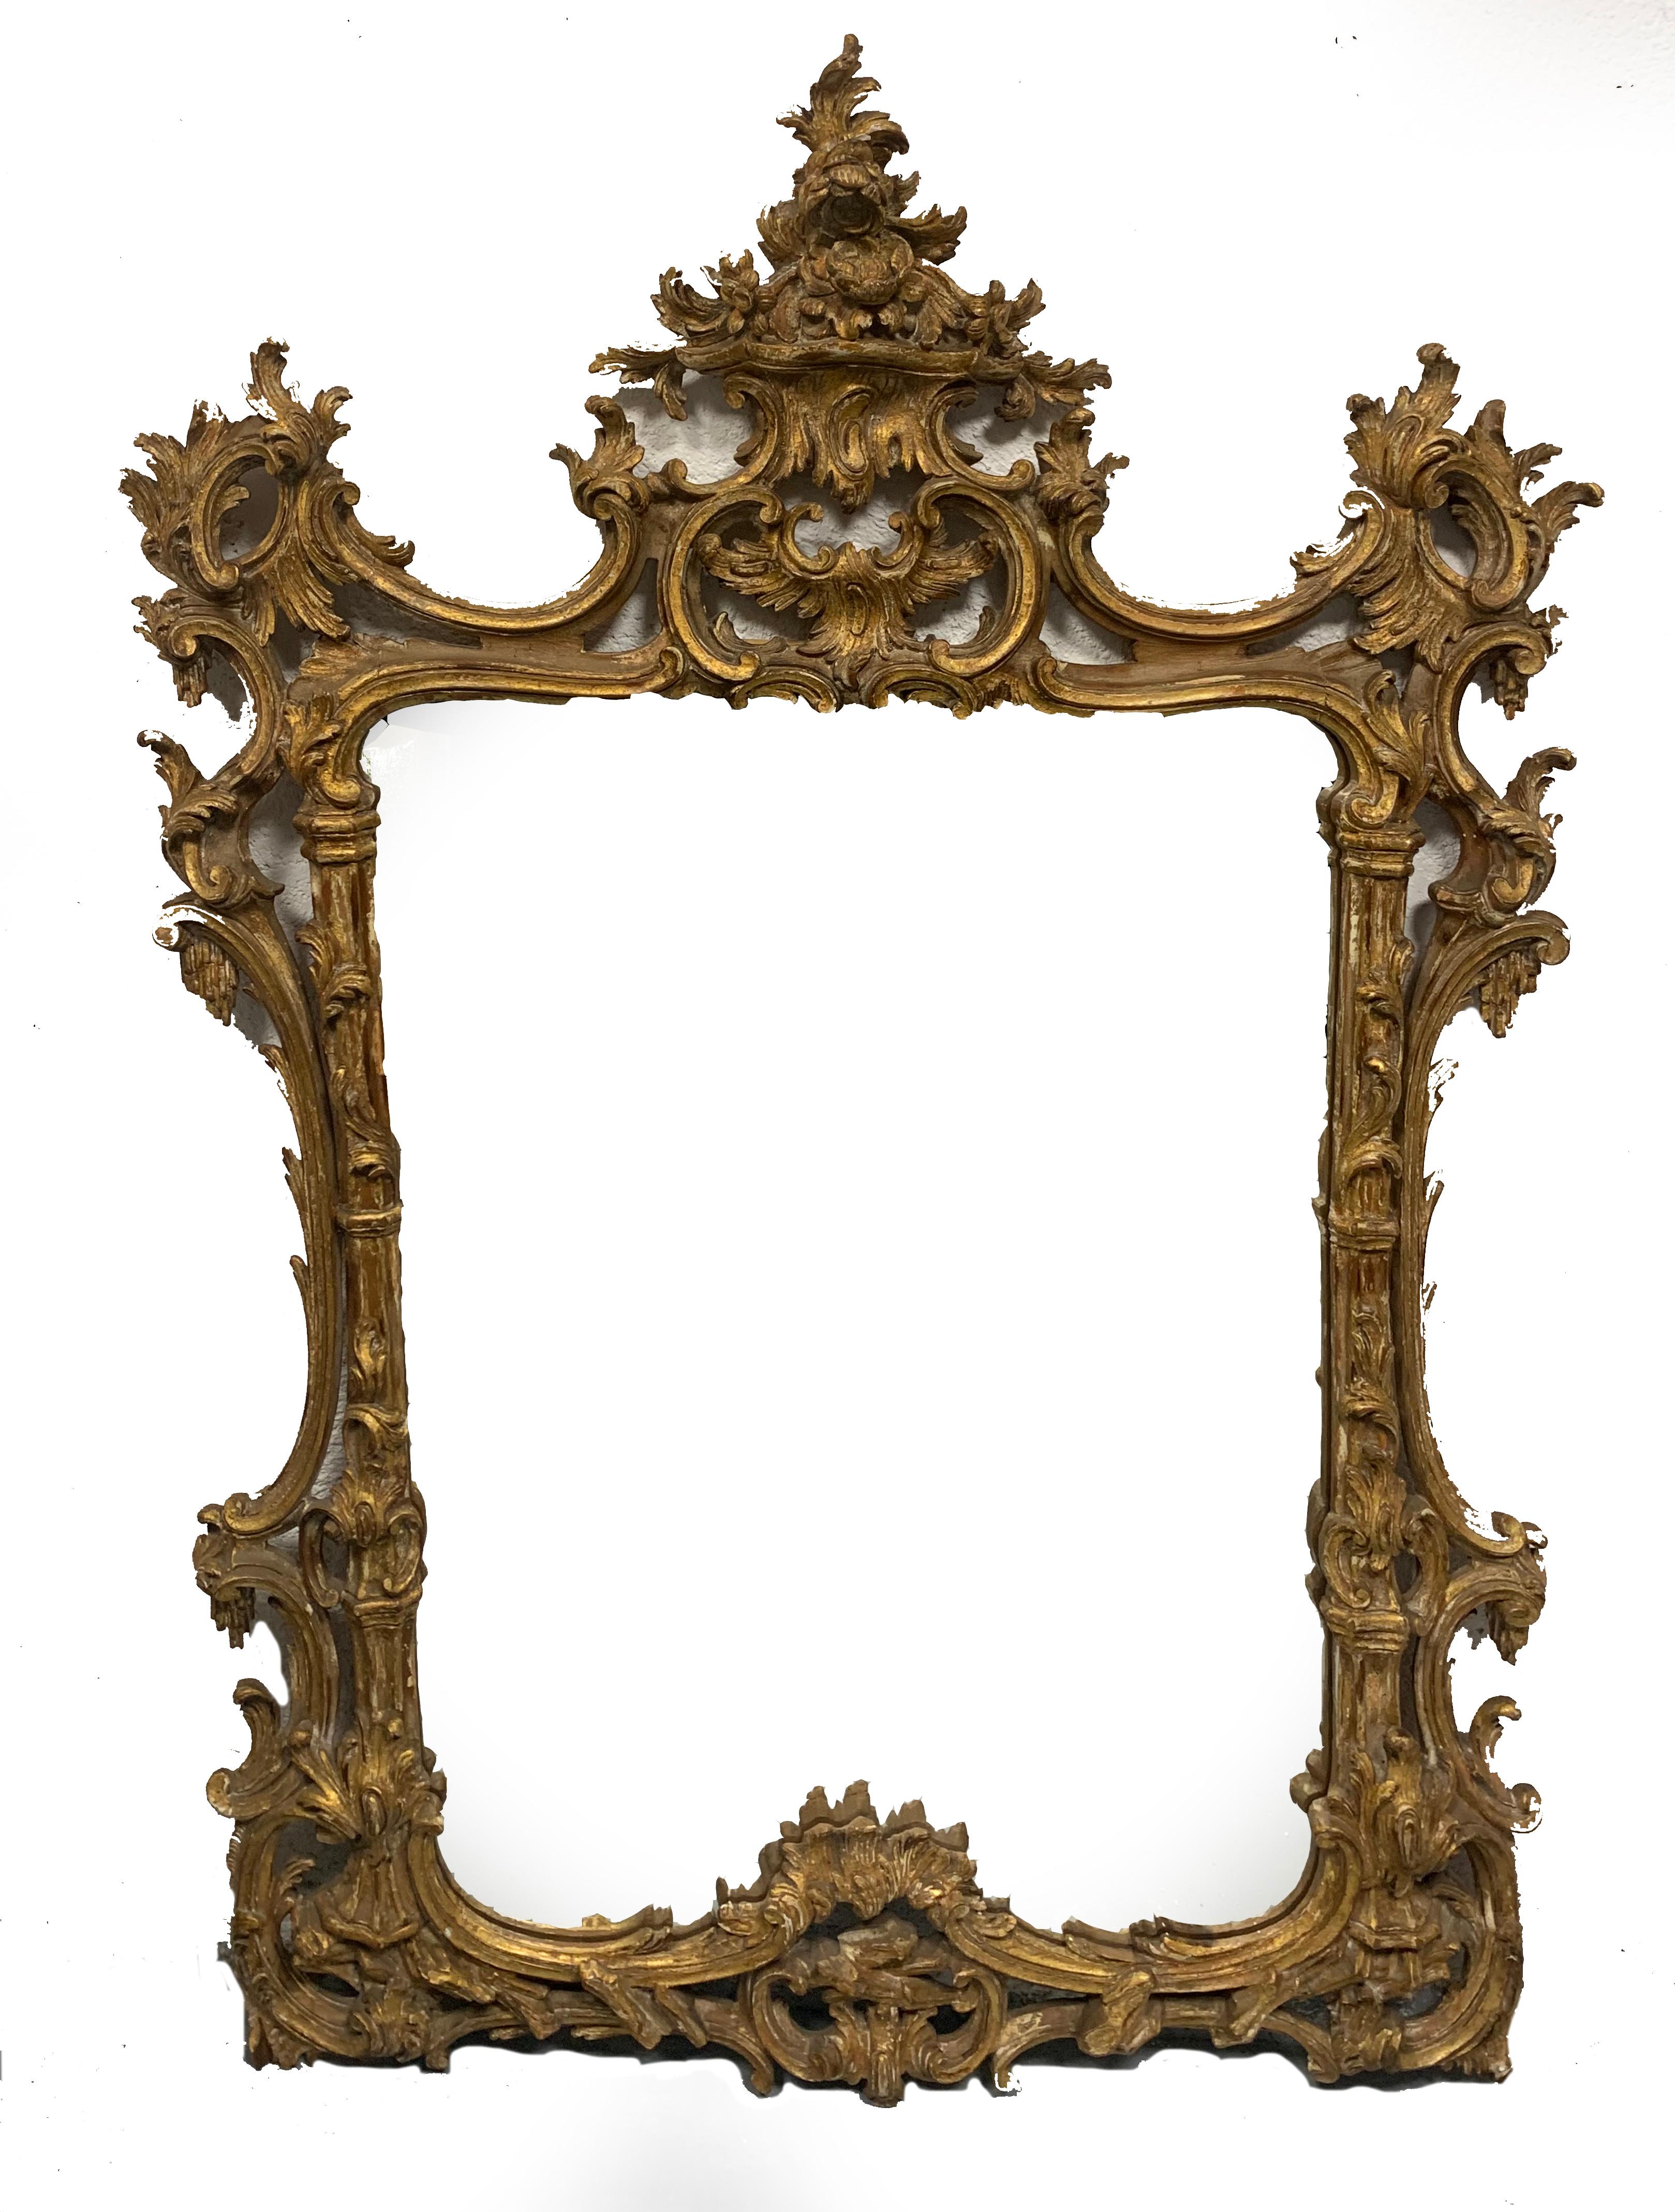 Beautiful wood carved golden mirror with delicate and robust openwork carving throughout. The warm gilt wood surface of this mirror is exceptional.